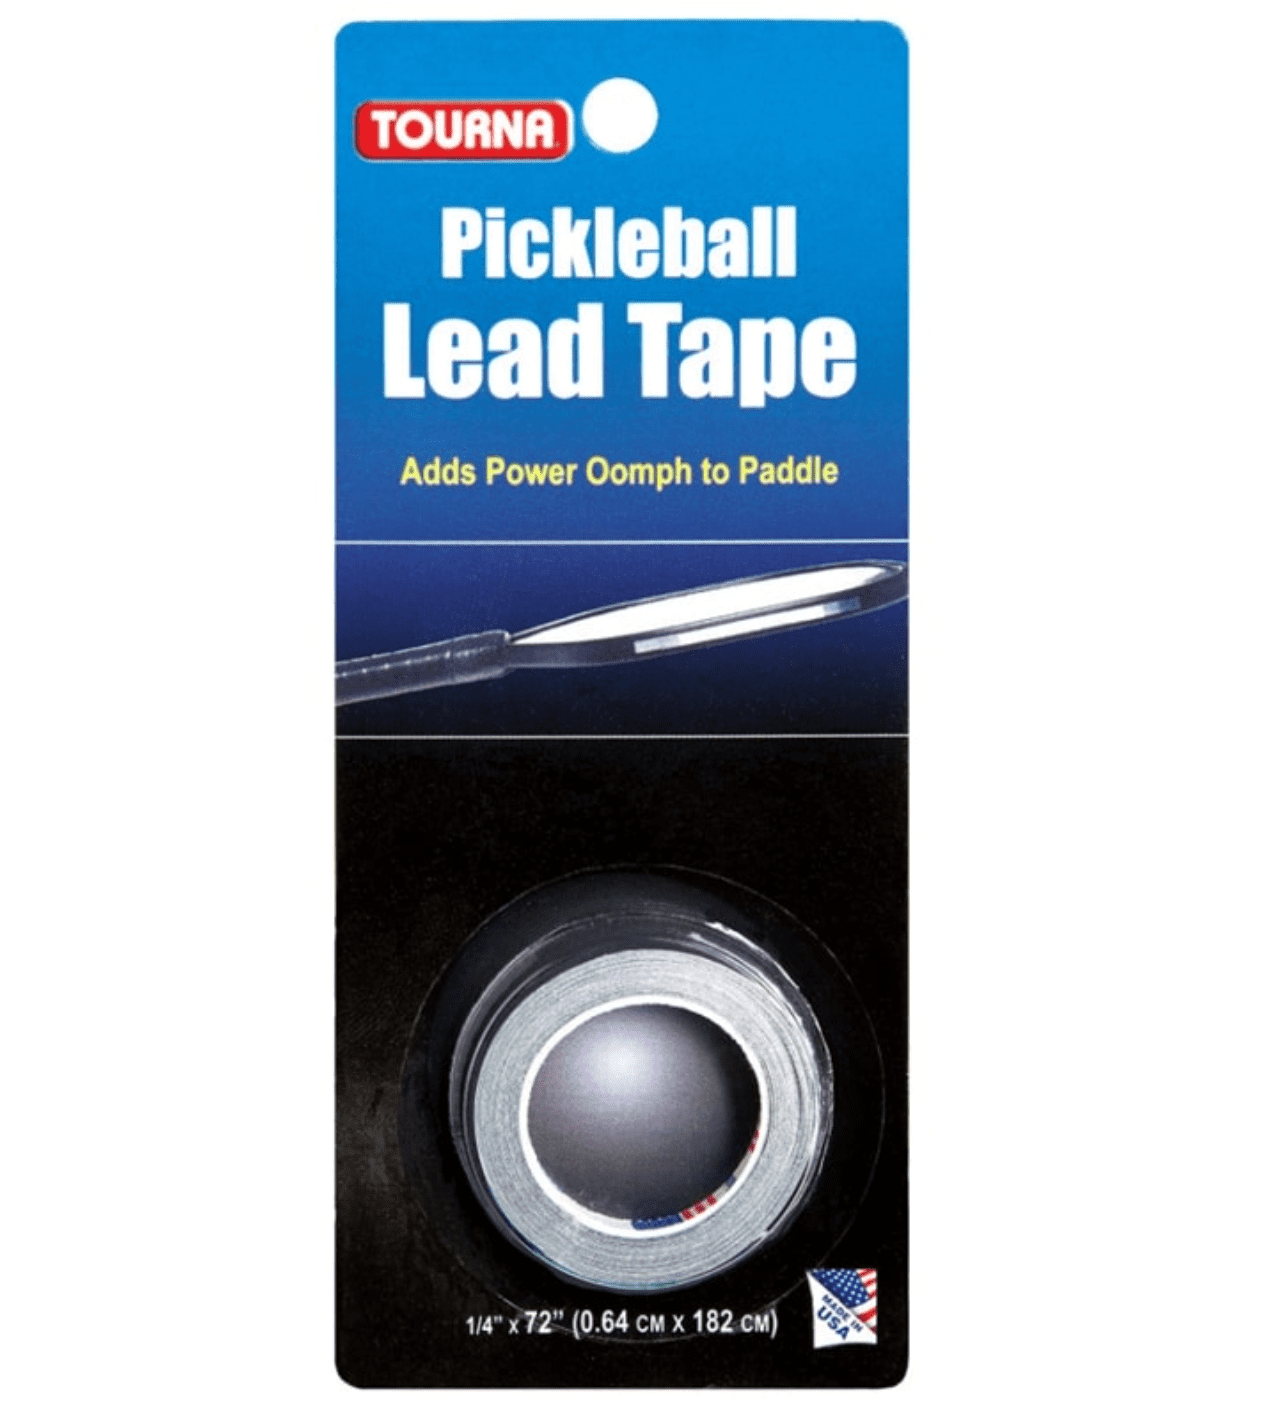 Customize your pickleball padddle with lead tape